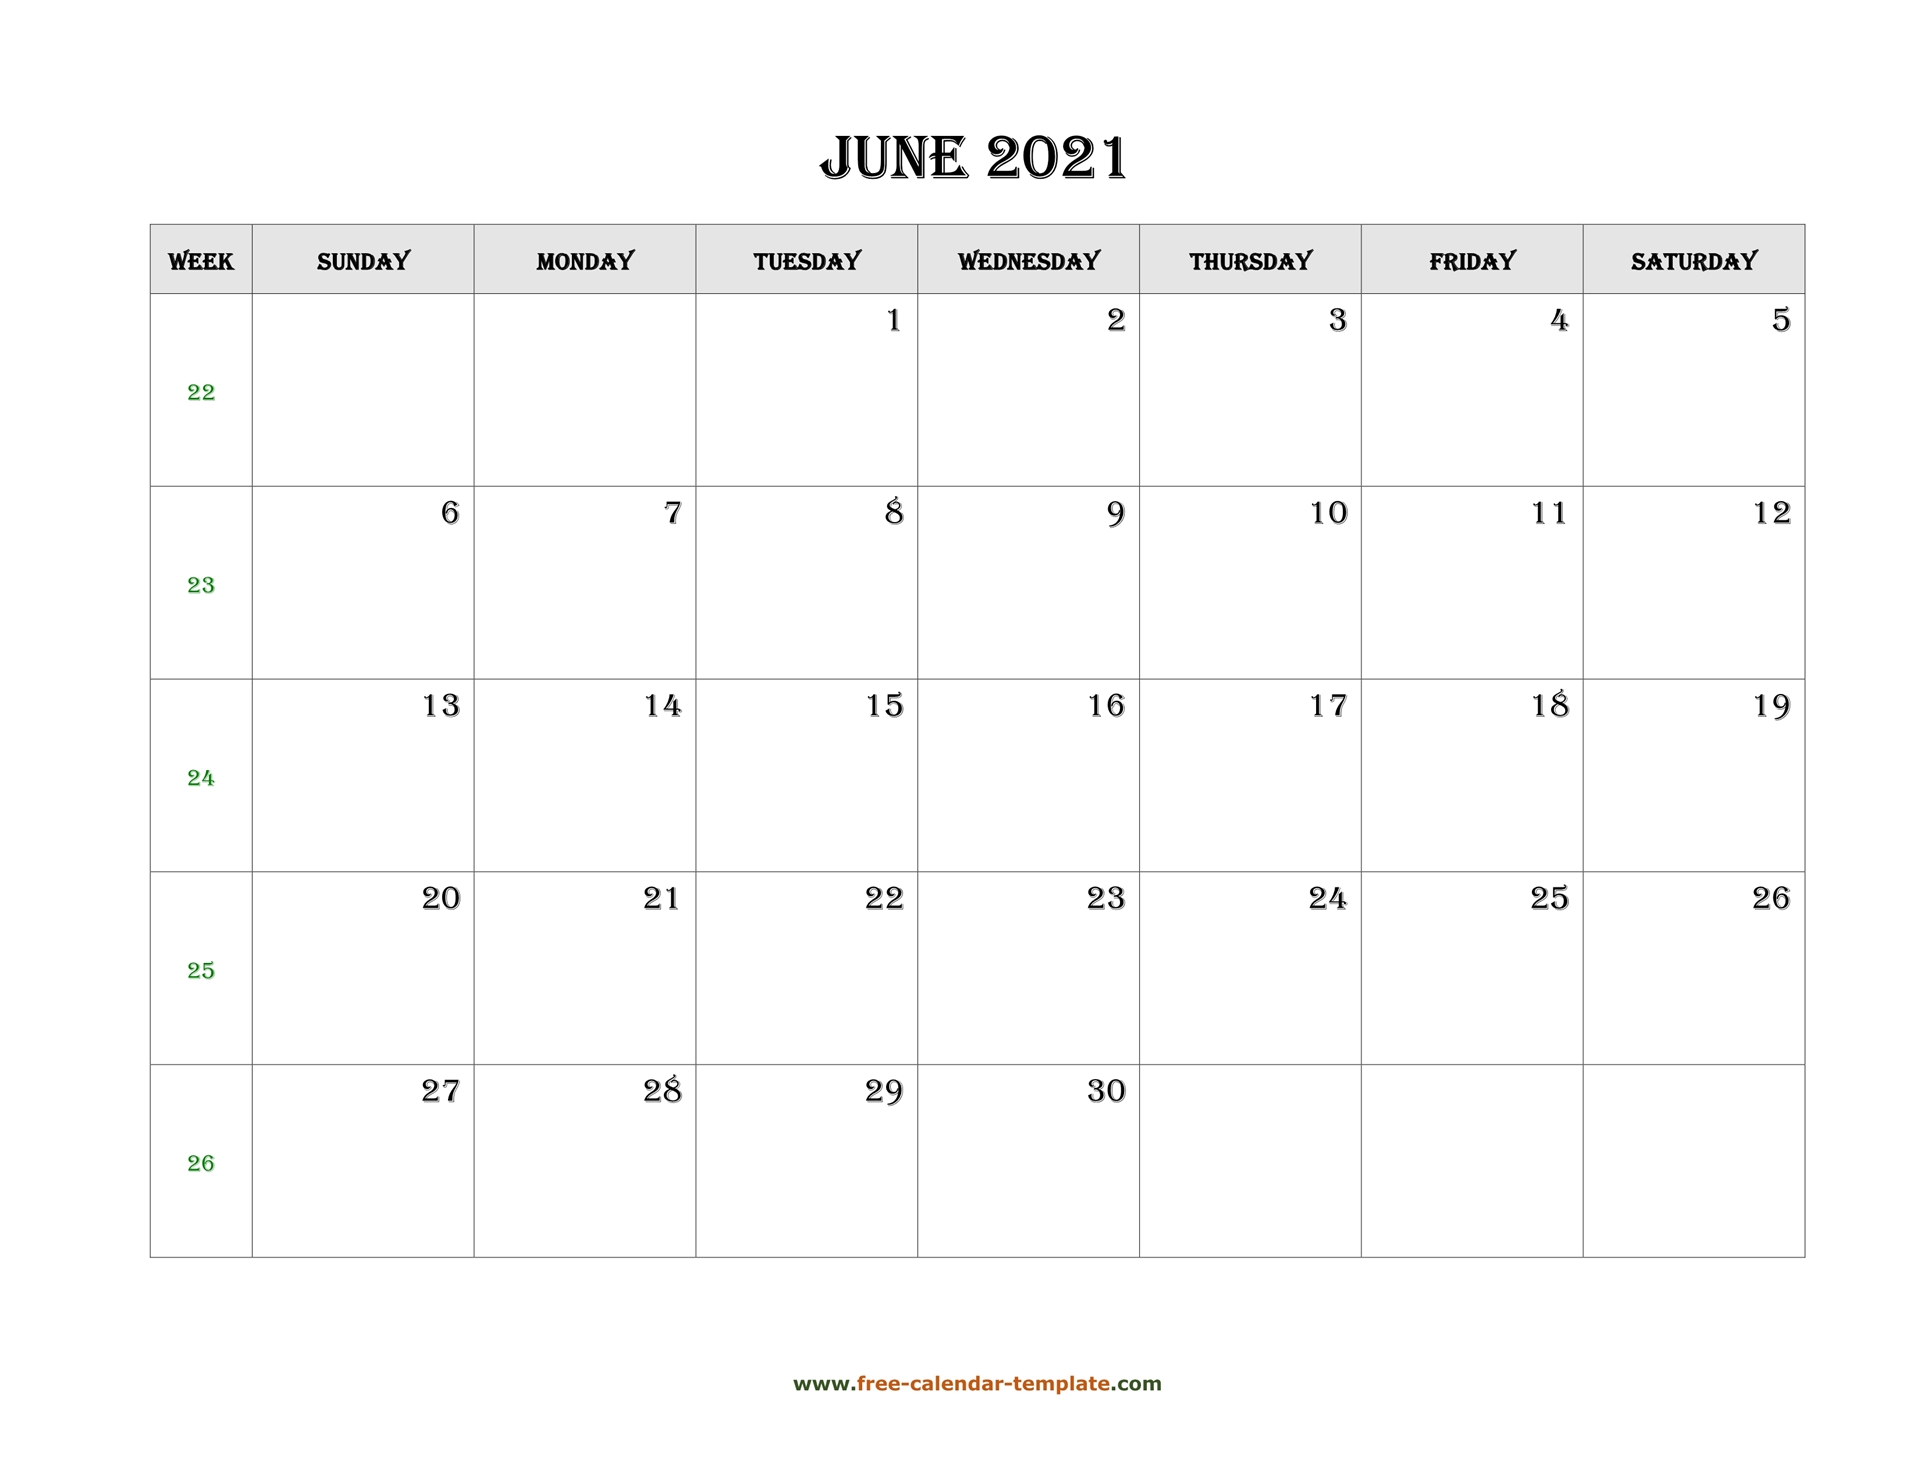 simple june calendar 2021 large box on each day for notes free calendar template com